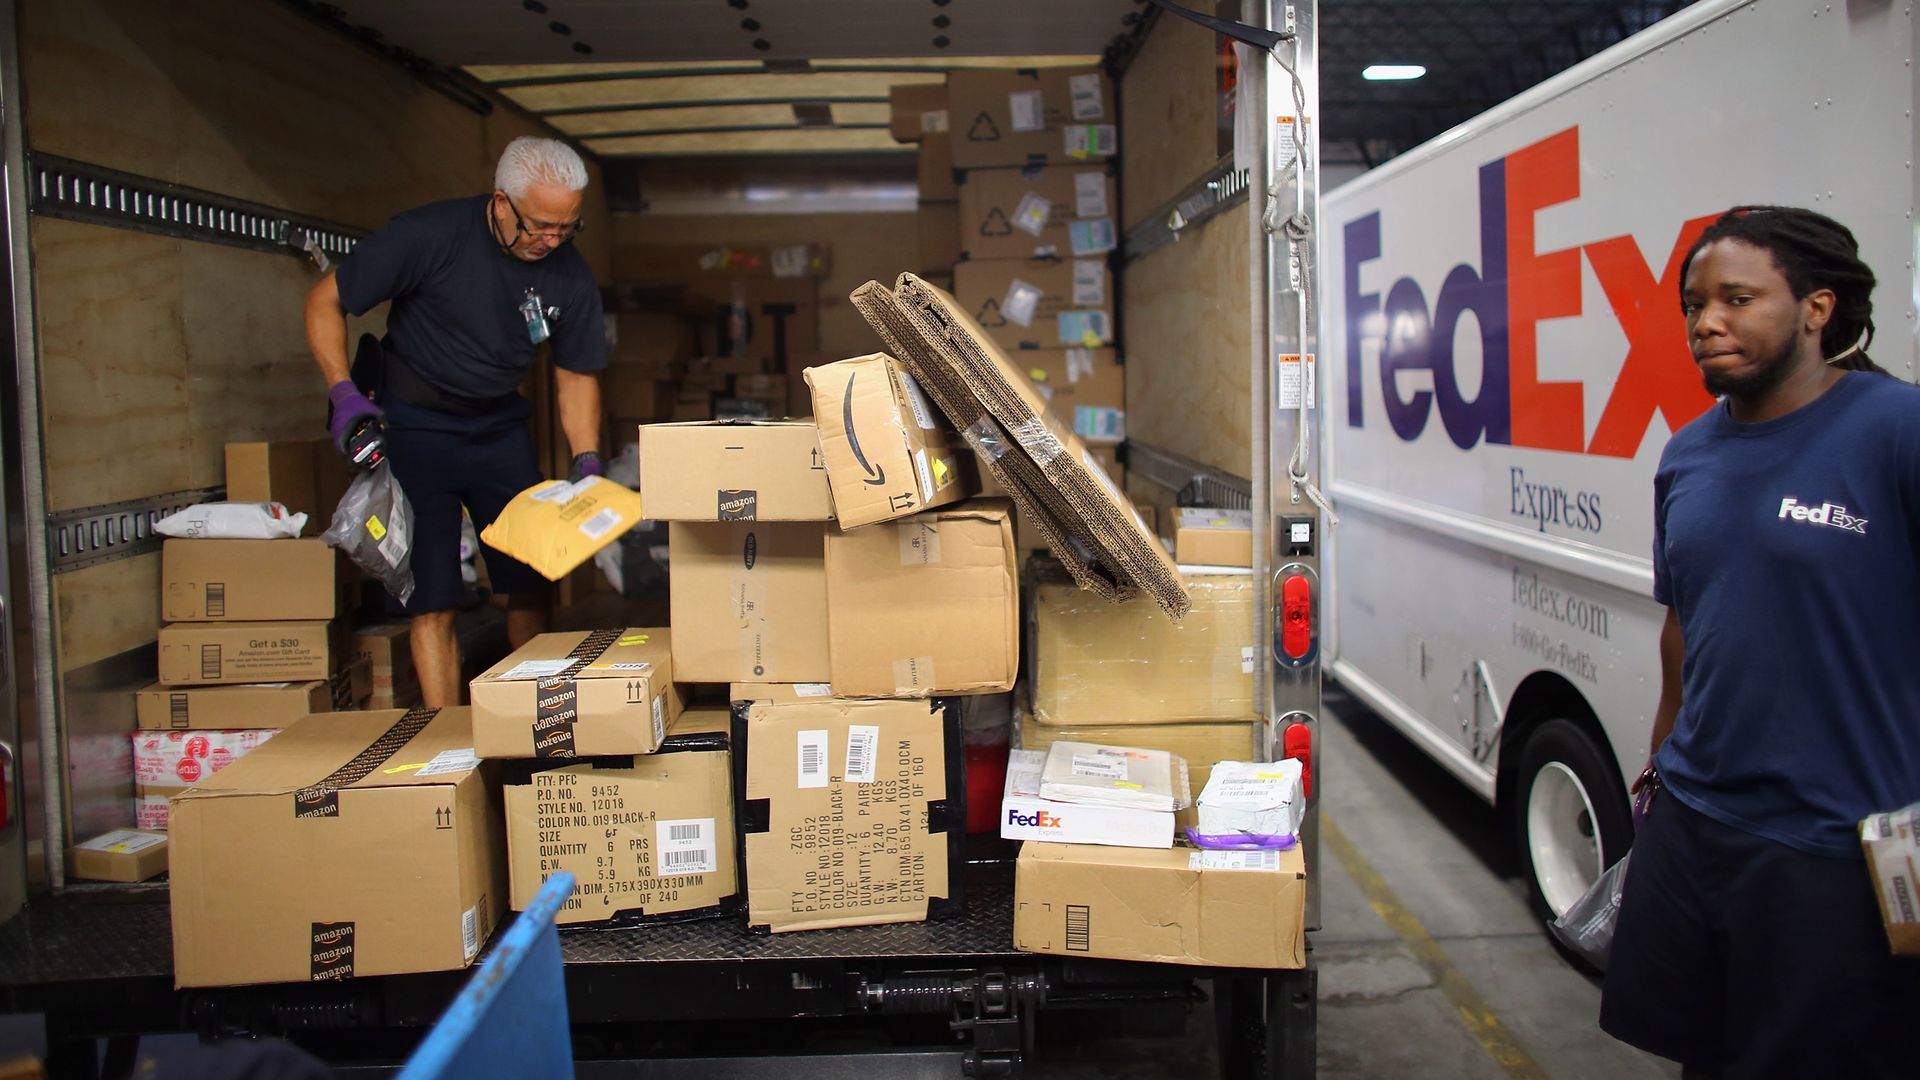 Fedex workers loading packages into a truck